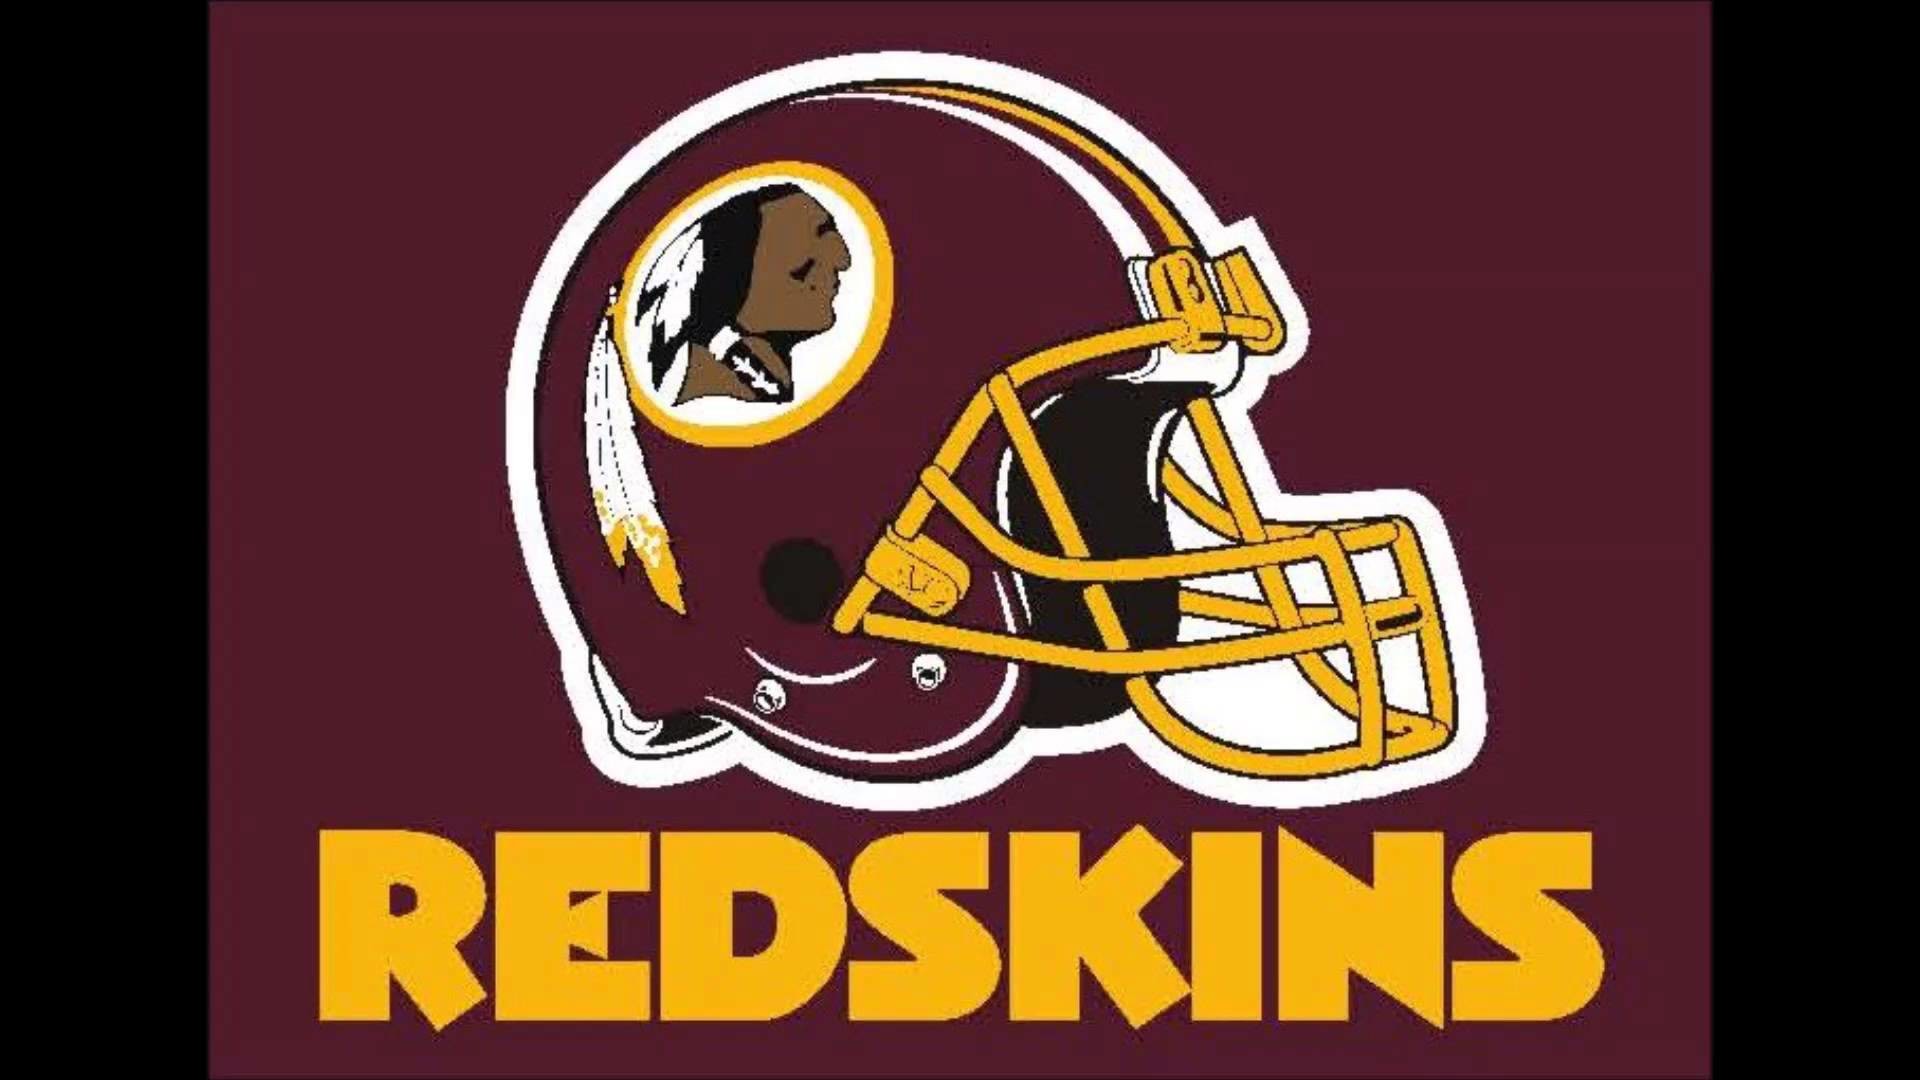 1920x1080 "HAIL TO THE REDSKINS" ON 3 GUITARS!!! - YouTube